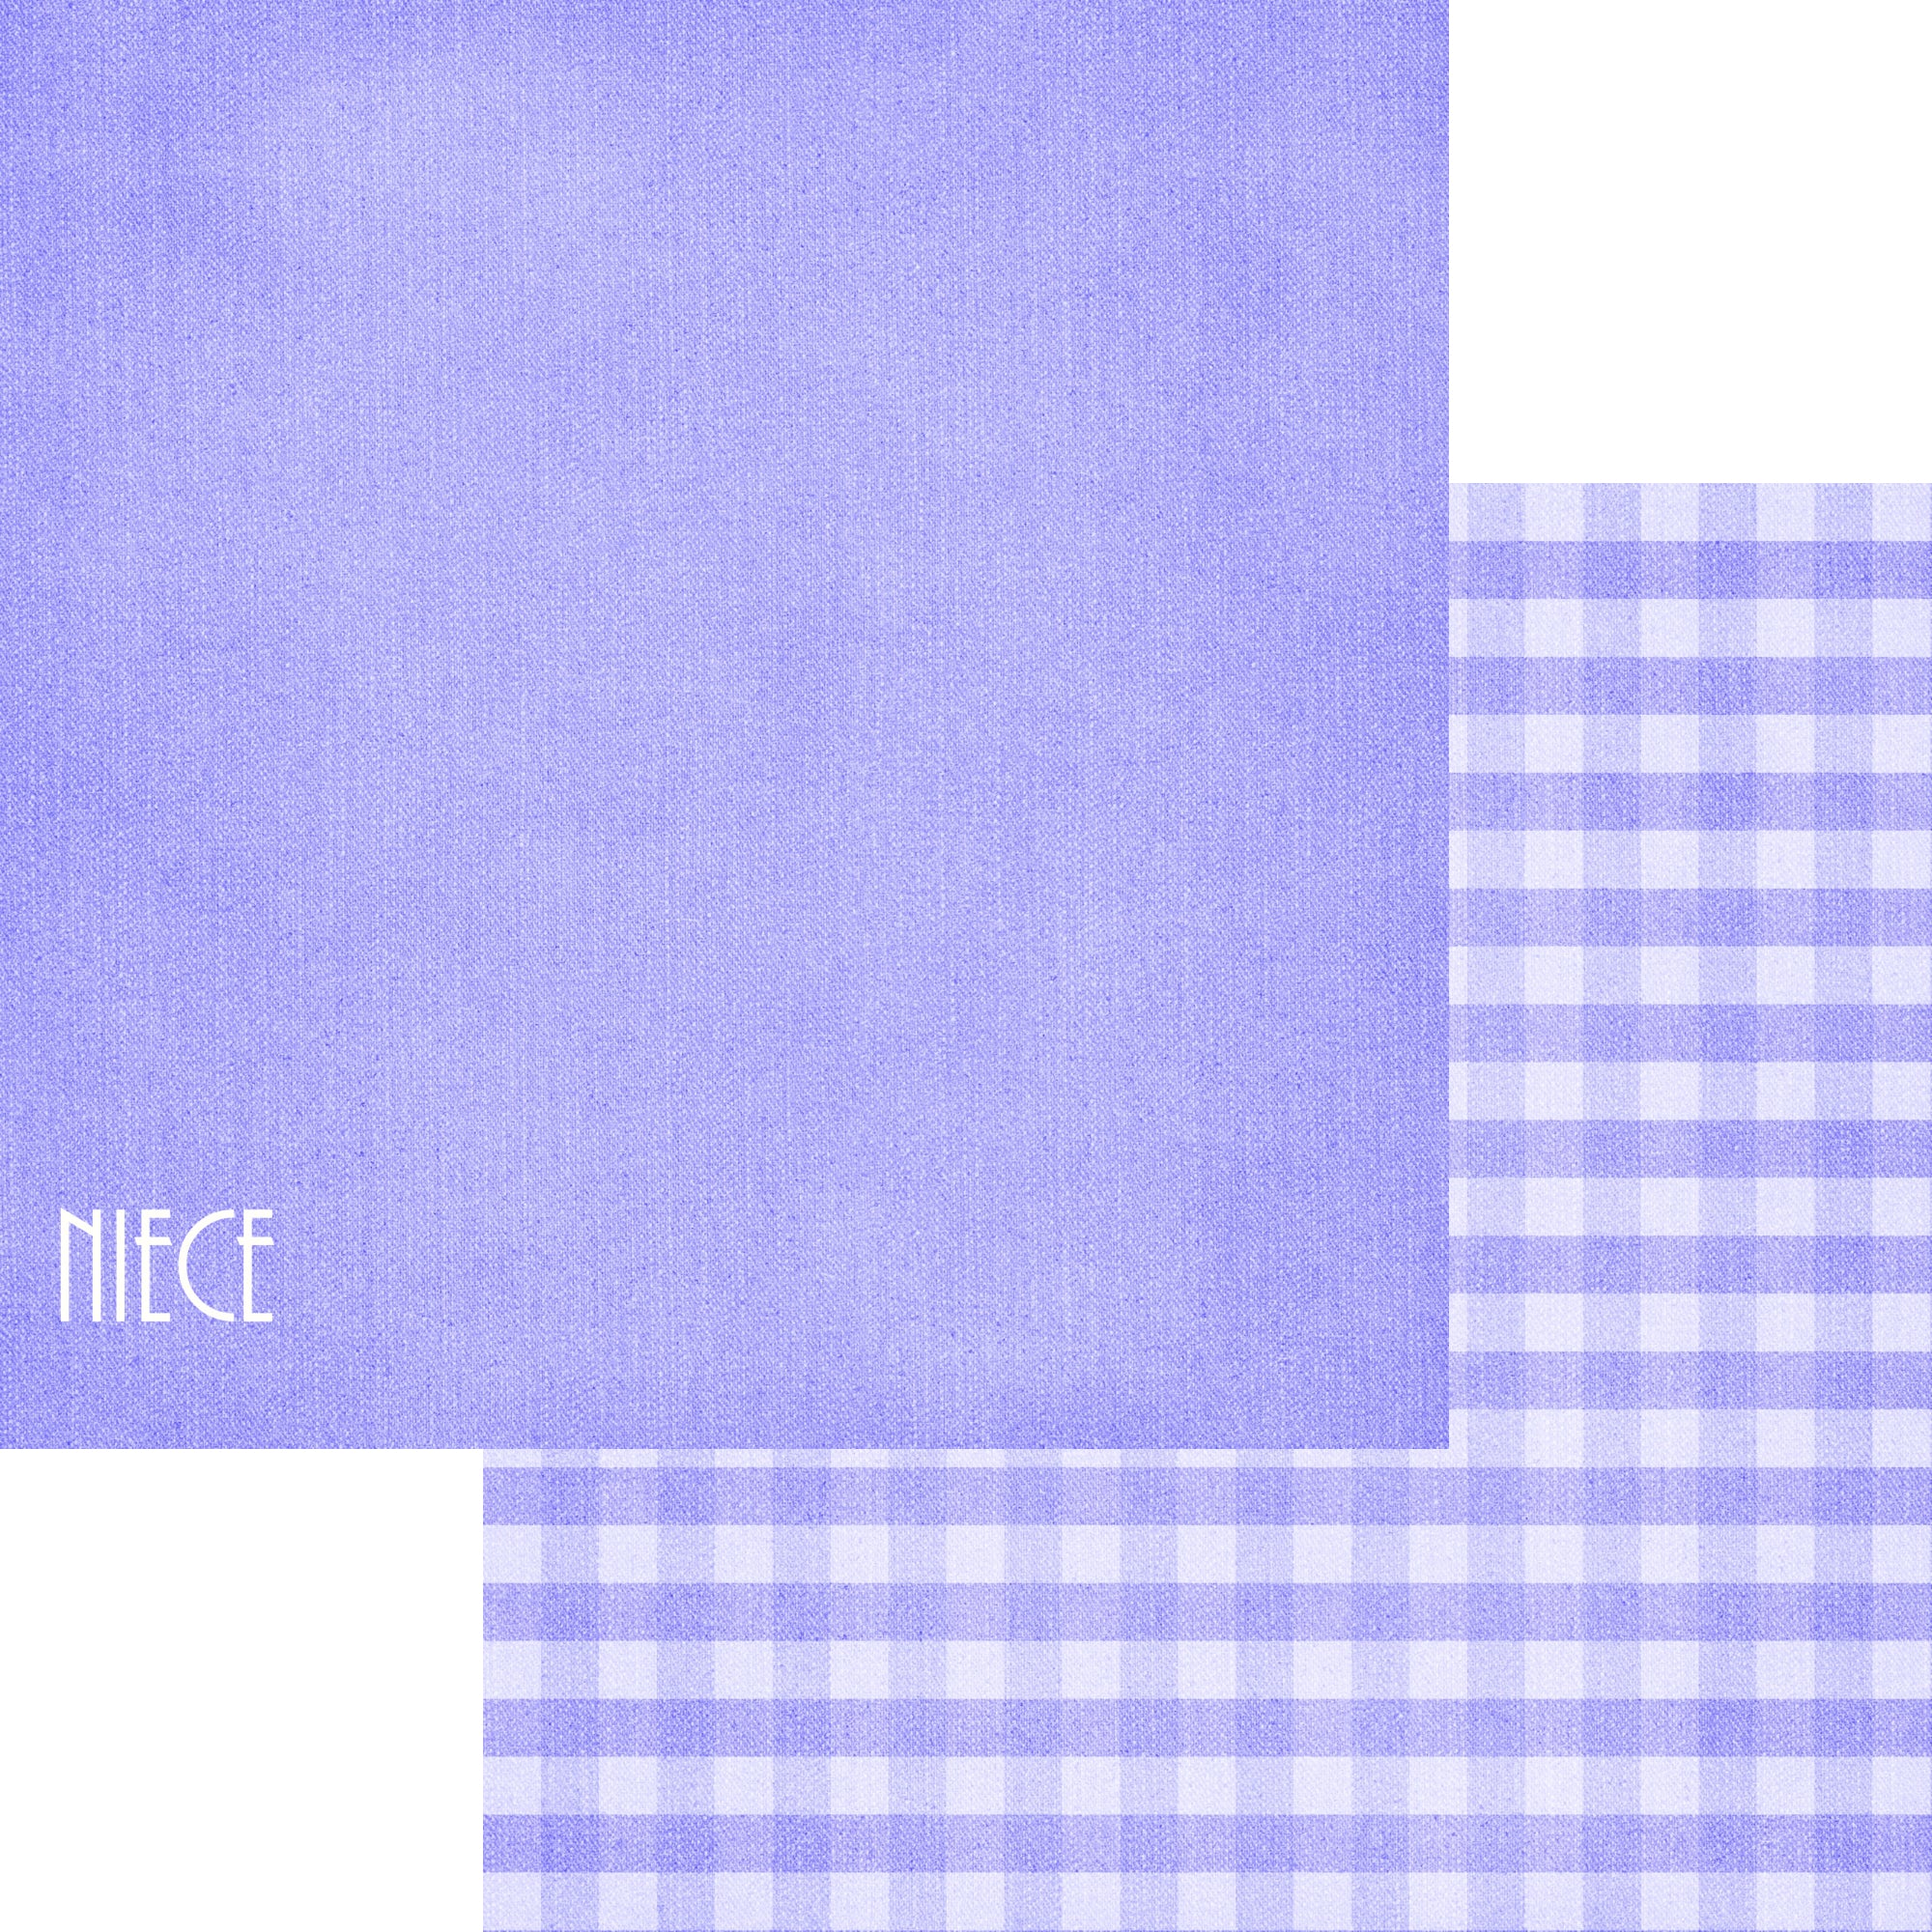 Family Collection Niece 12 x 12 Double-Sided Scrapbook Paper by SSC Designs